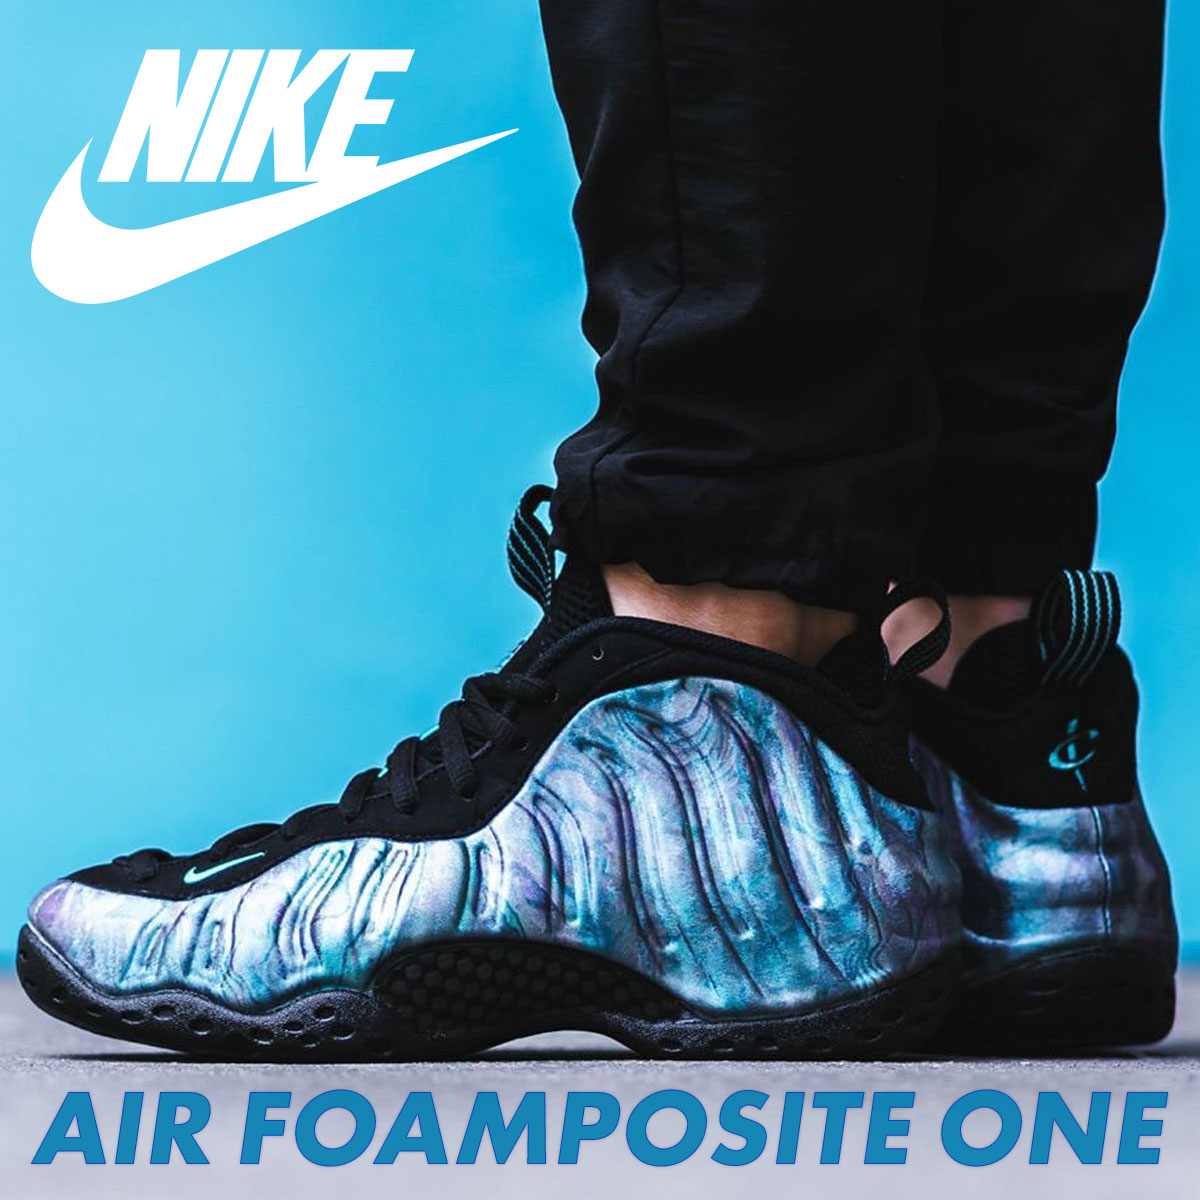 This Nike Air Foamposite One Colorway Proves That Gum